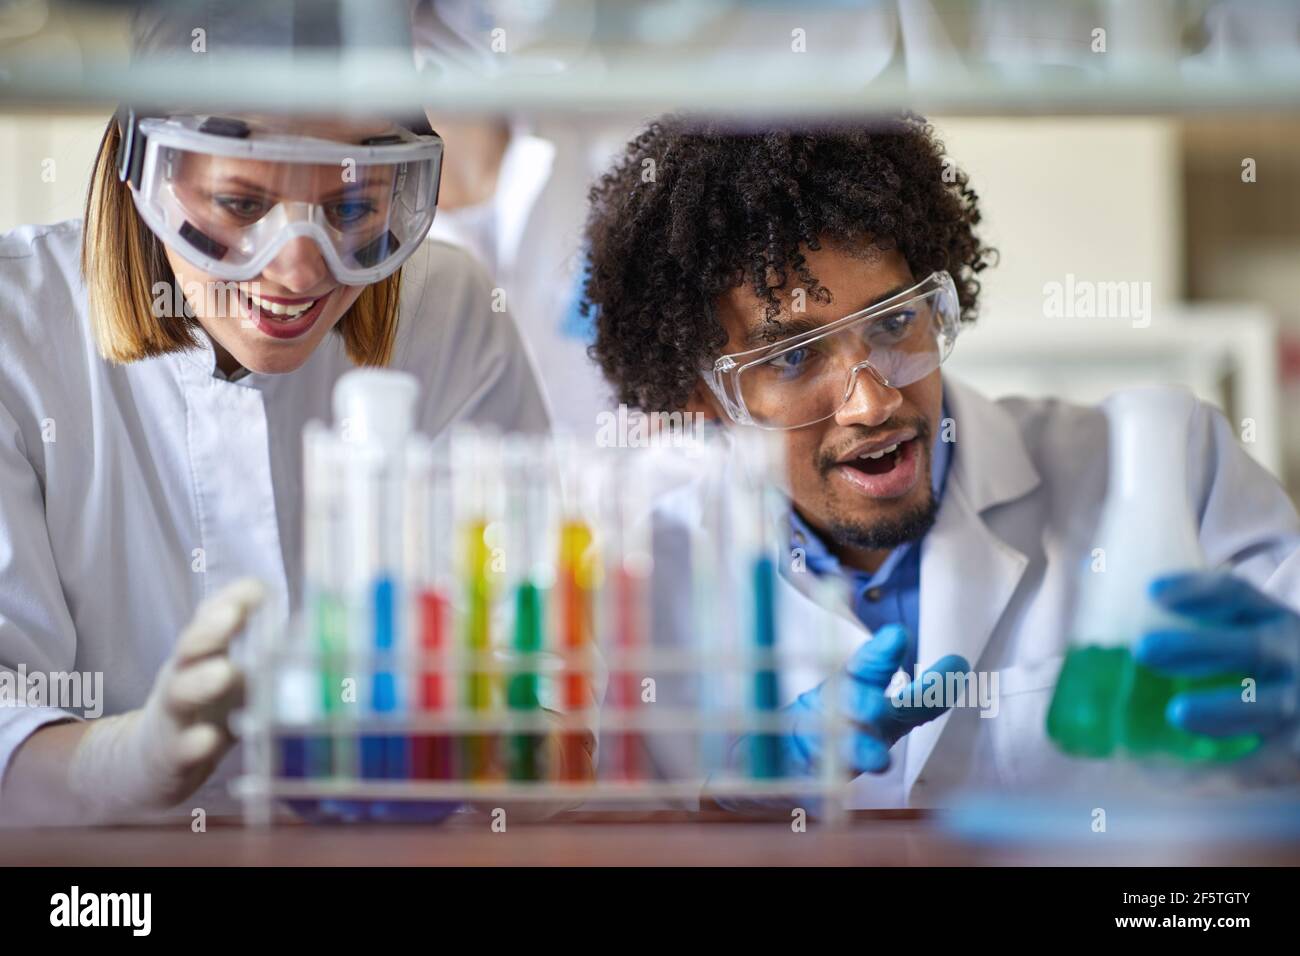 Young colleagues in a protective gear observe chemical reactions in a working atmosphere at the university laboratory. Science, chemistry, lab, people Stock Photo